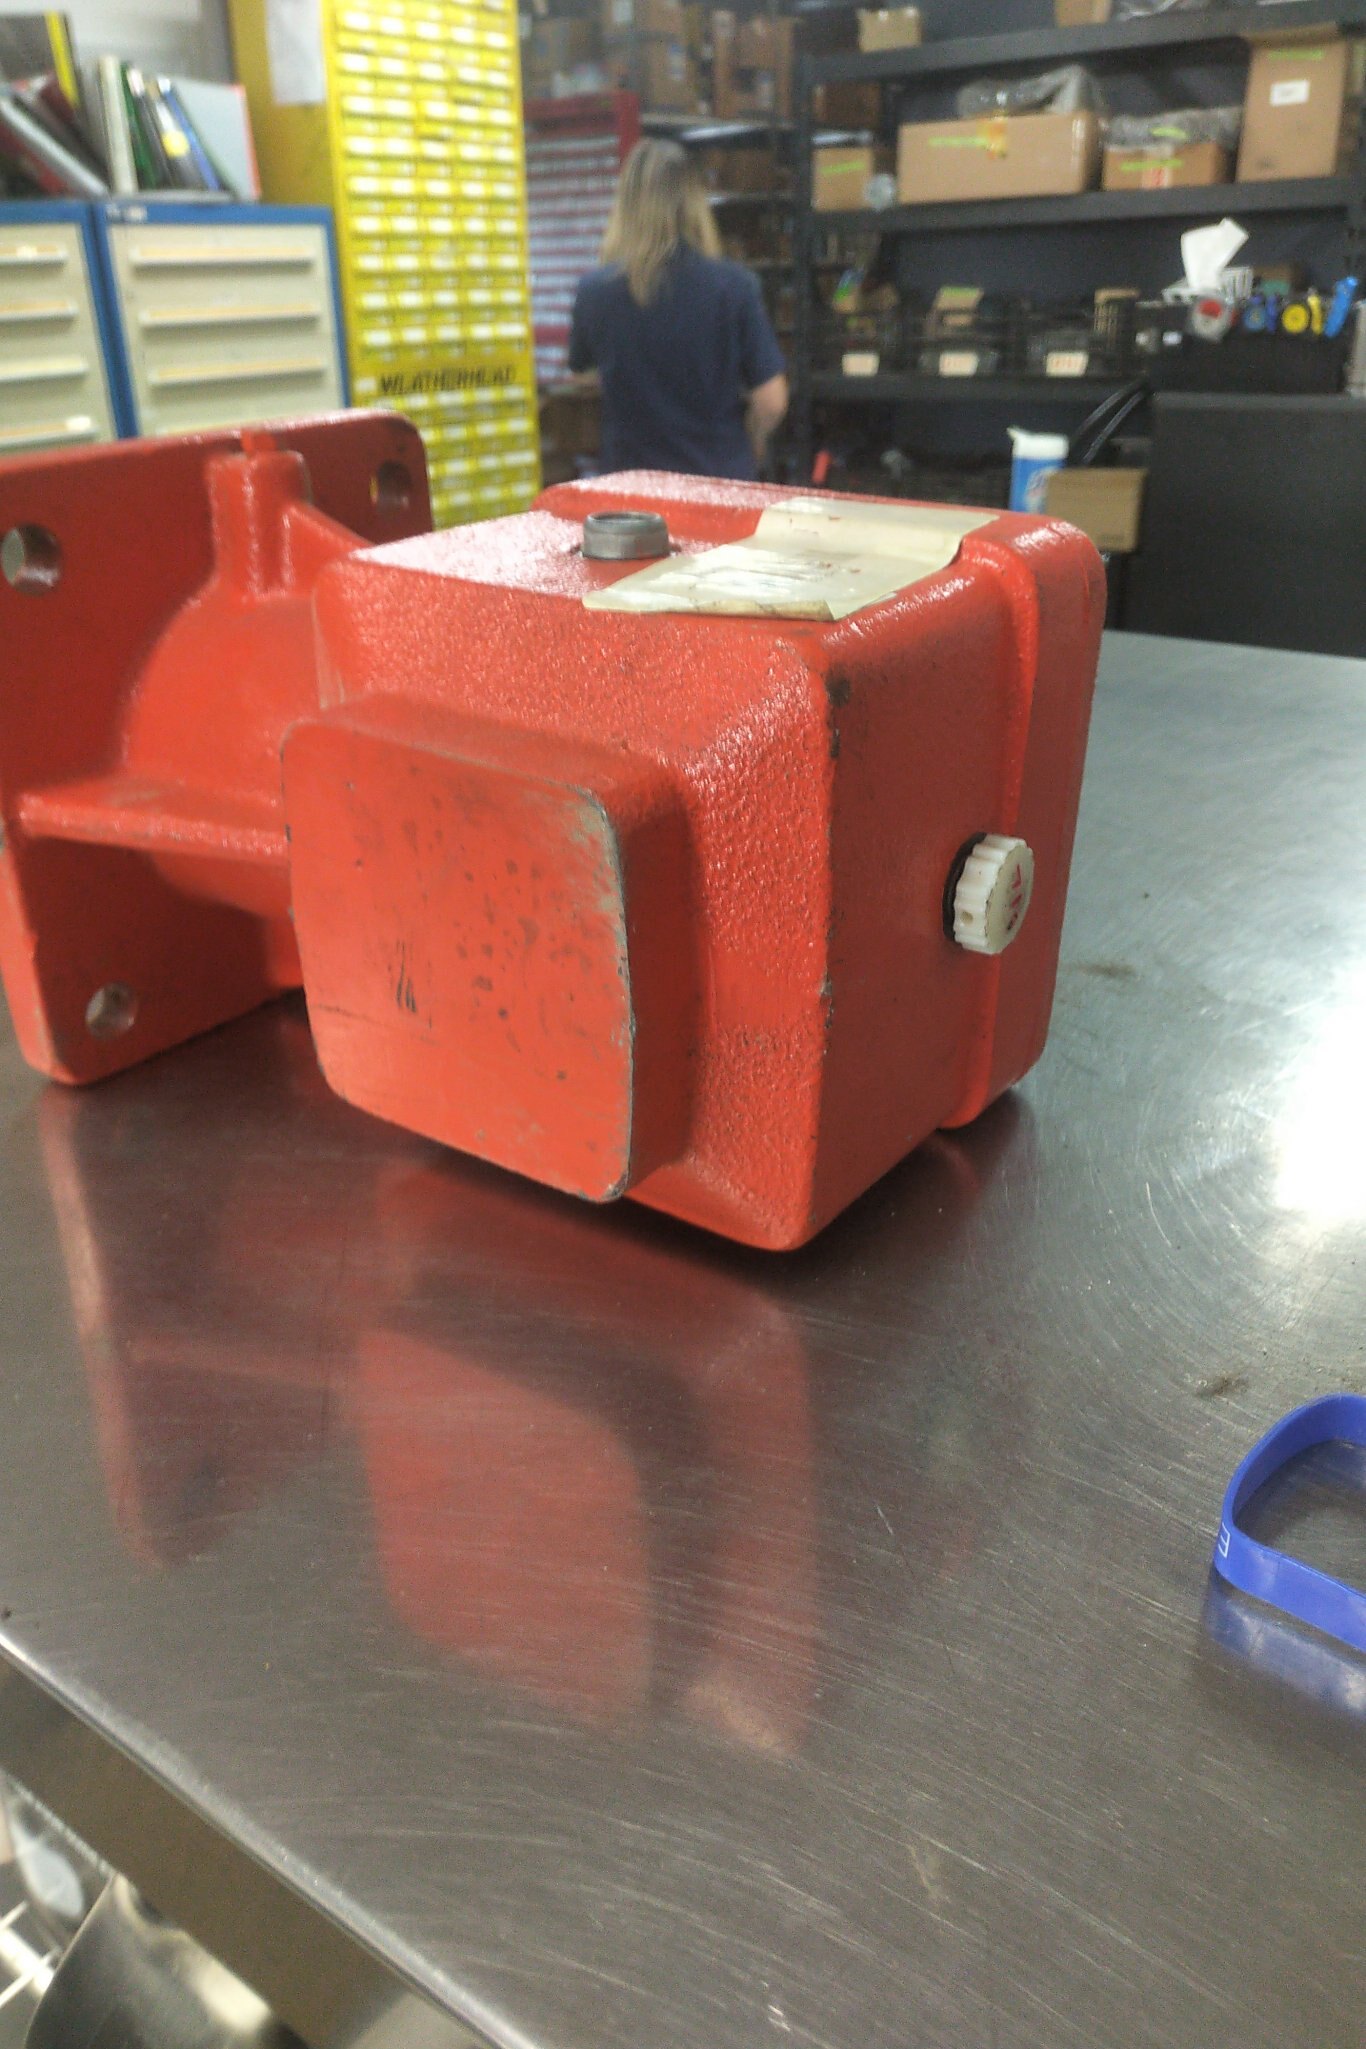 New Gear Box for a Rotary Cutter